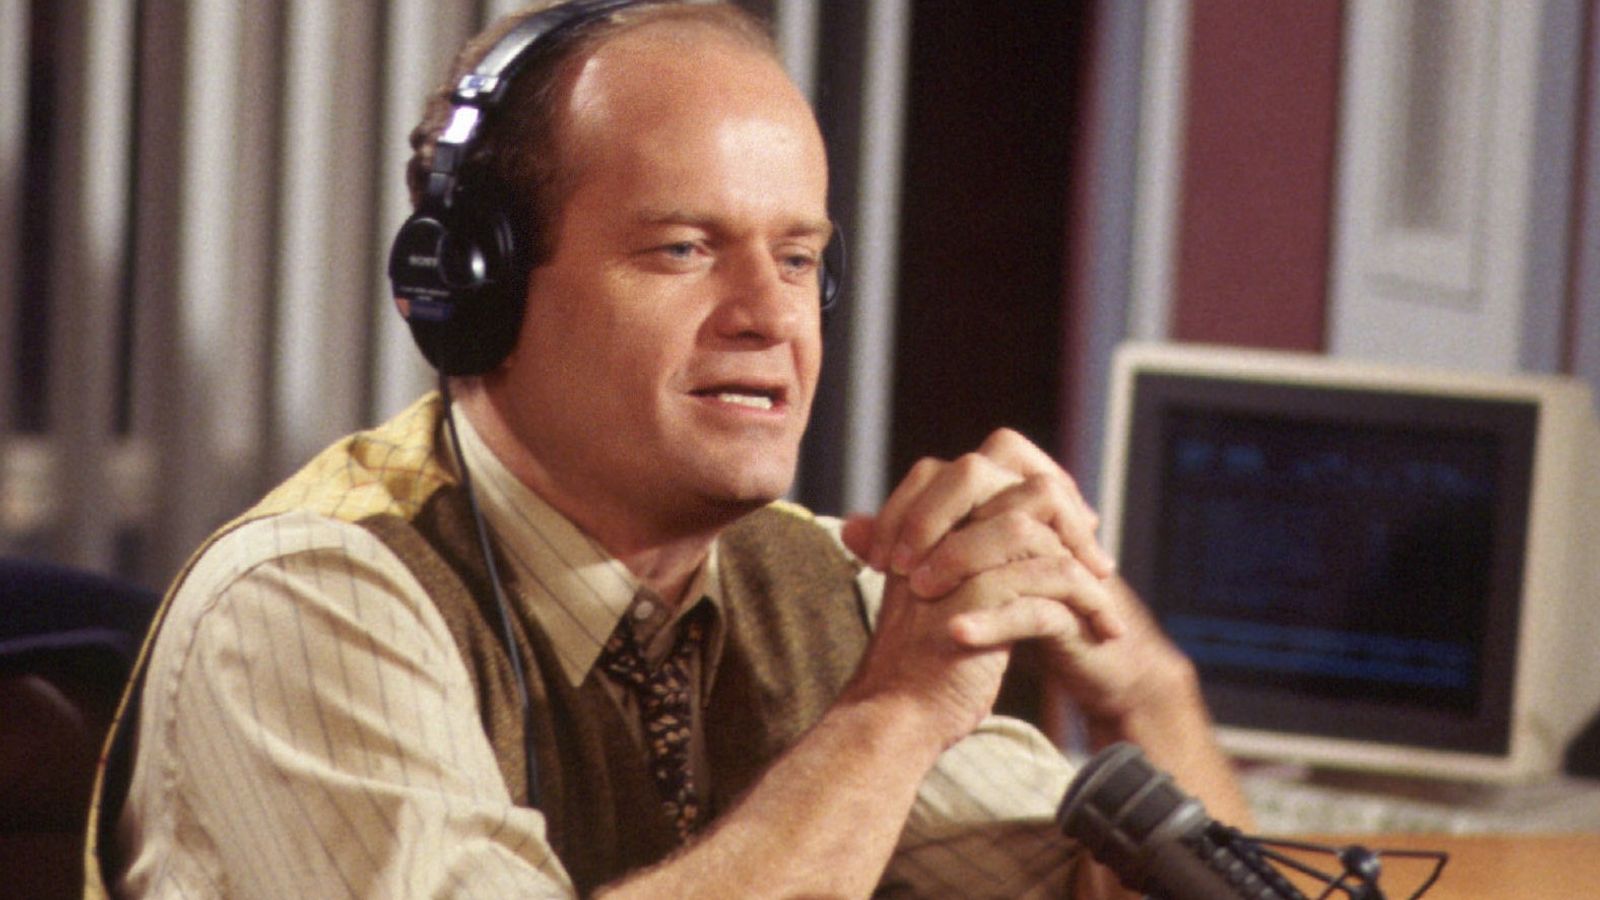 Frasier revival is officially happening - with Kelsey Grammer reprising role